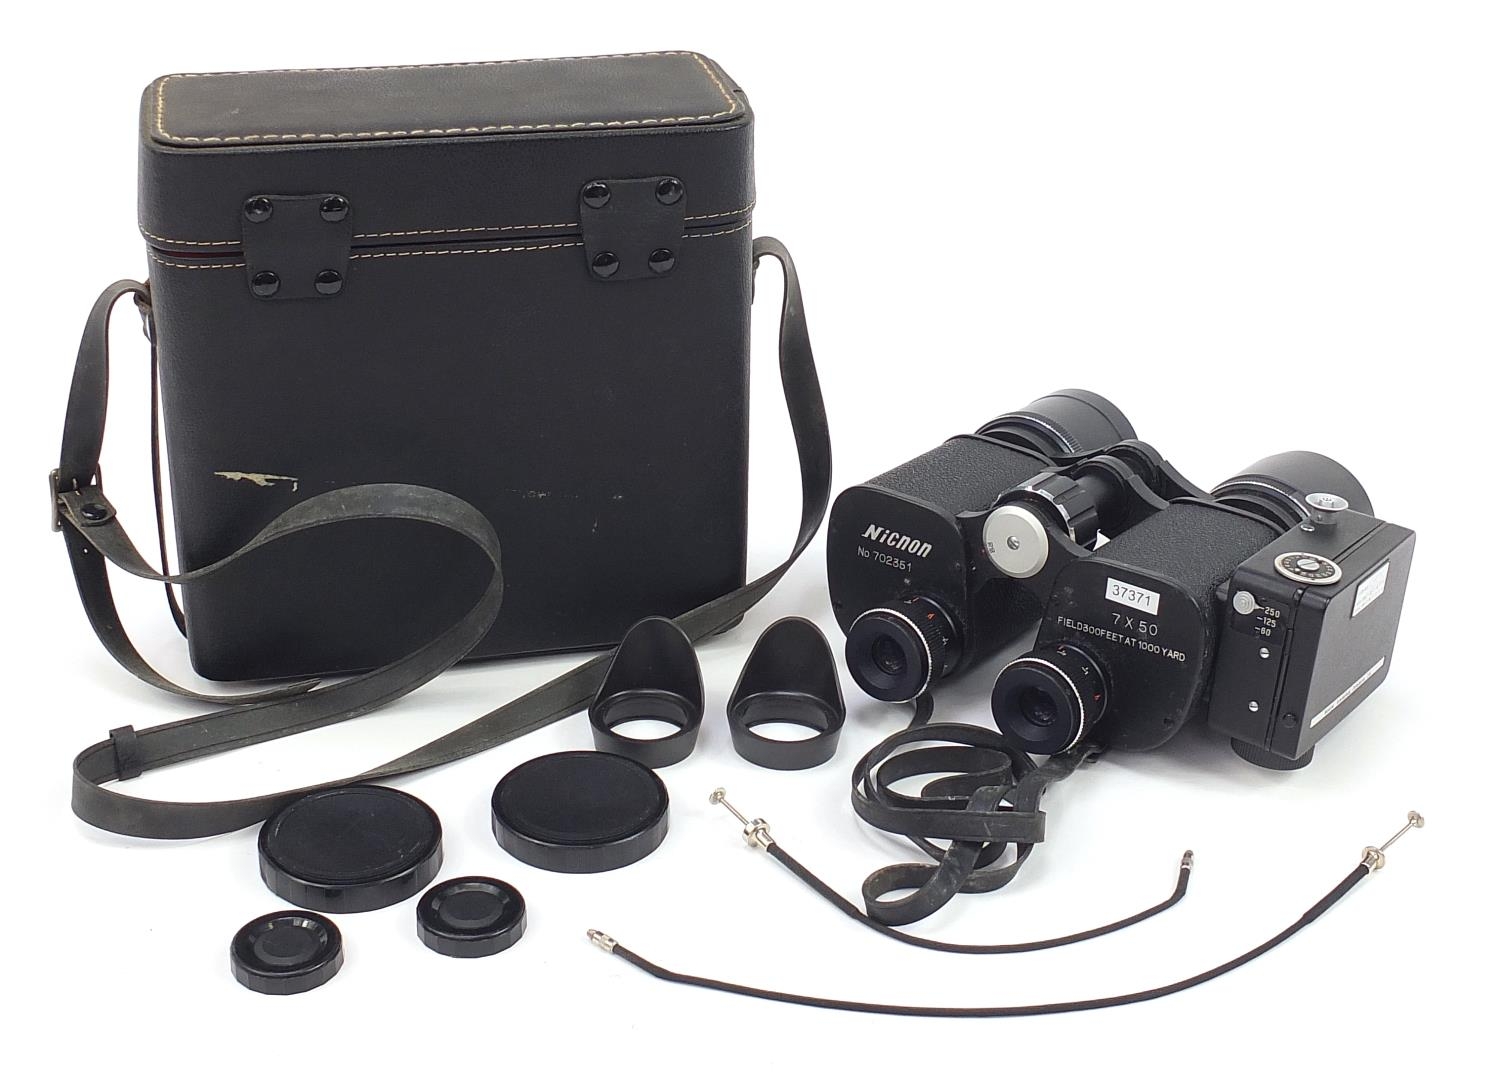 Nicnon TF7X50 combination binoculars and camera with protective case - Image 3 of 4